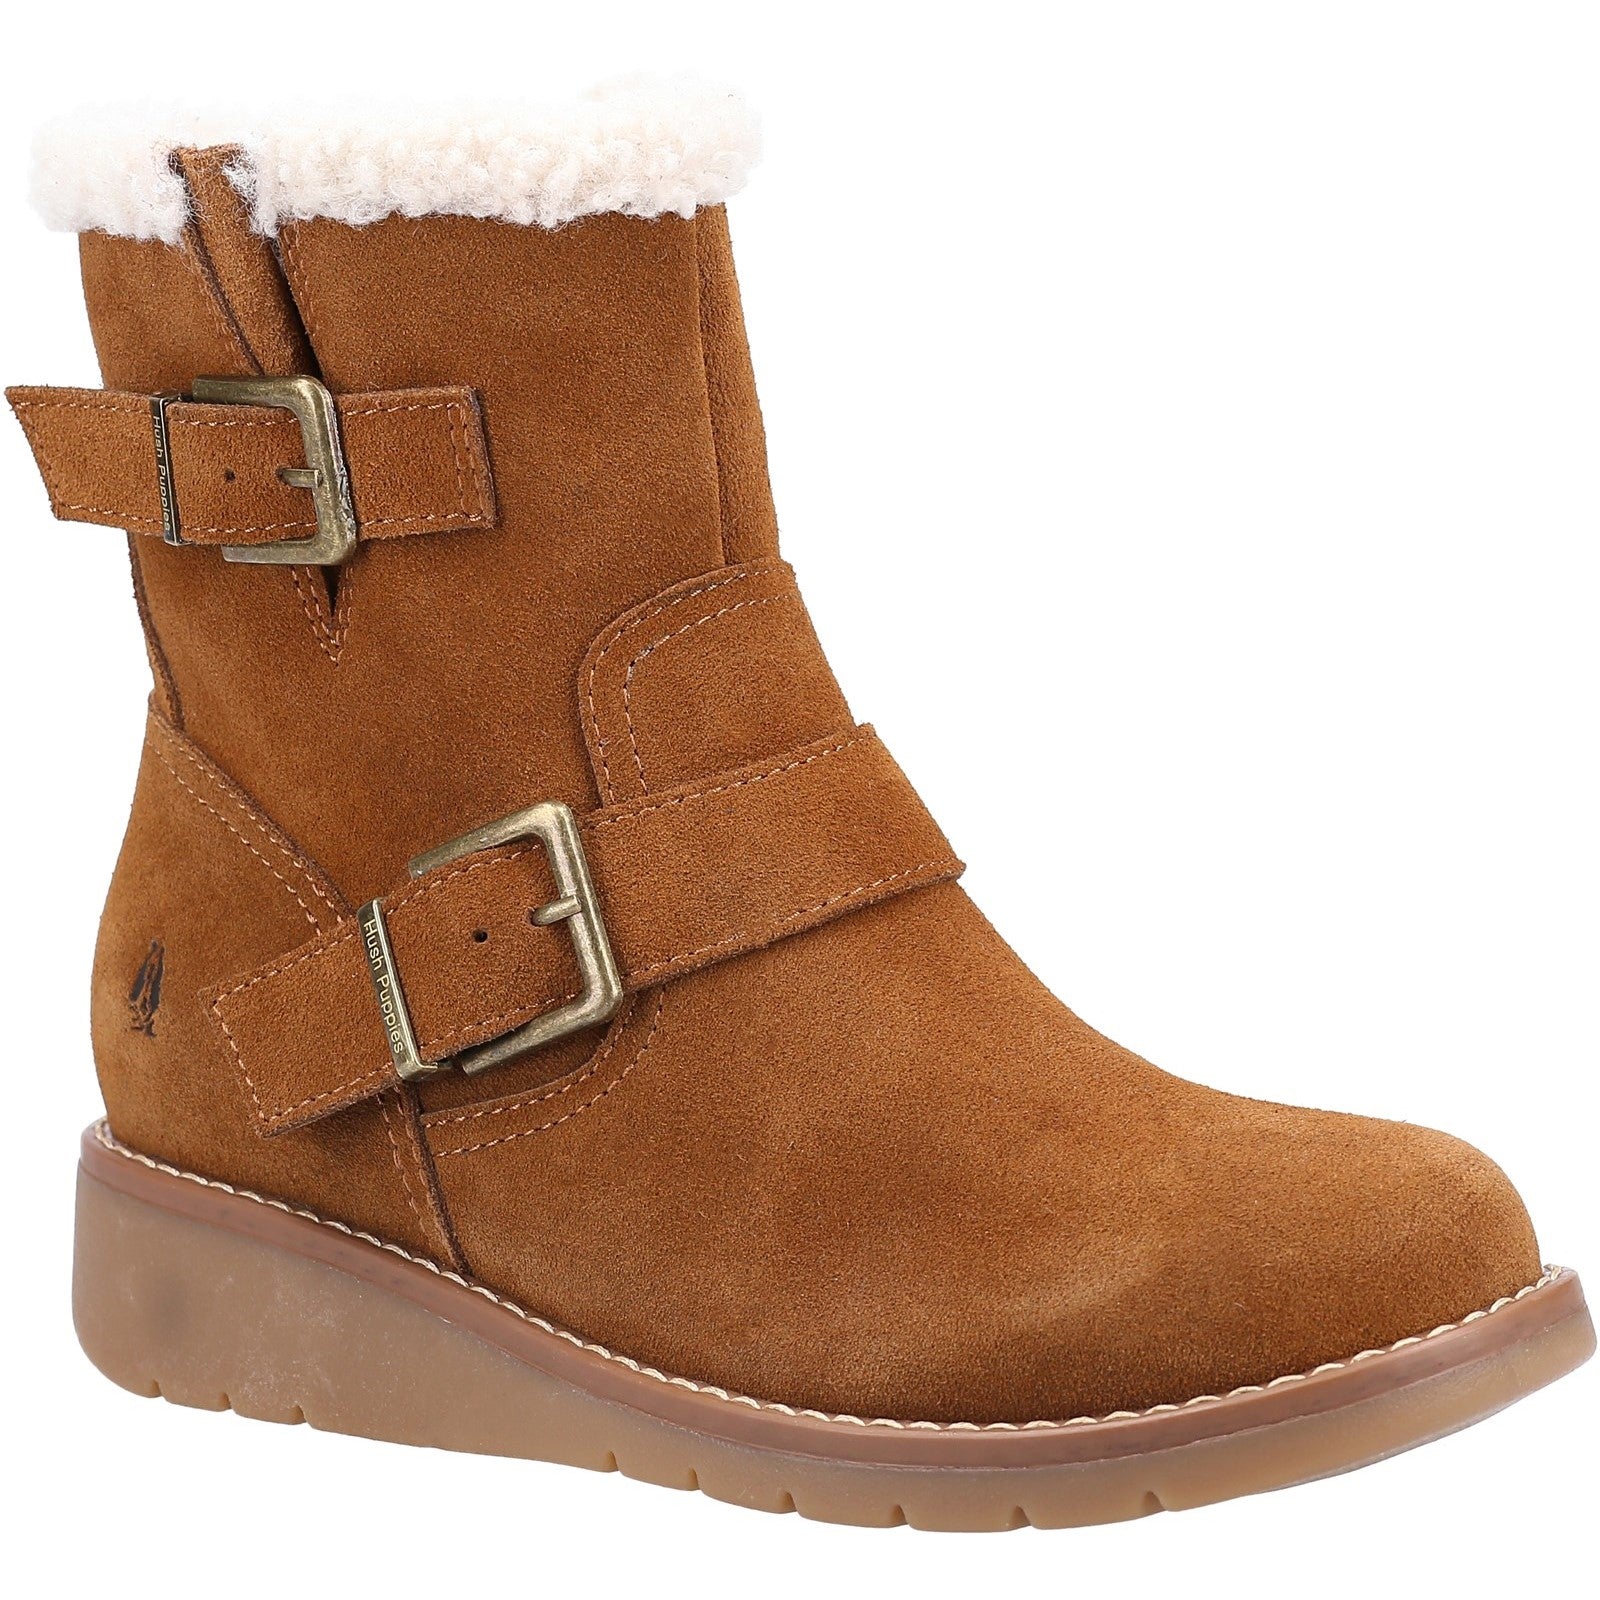 Ladies Ankle Boots Tan Hush Puppies Lexie Boot